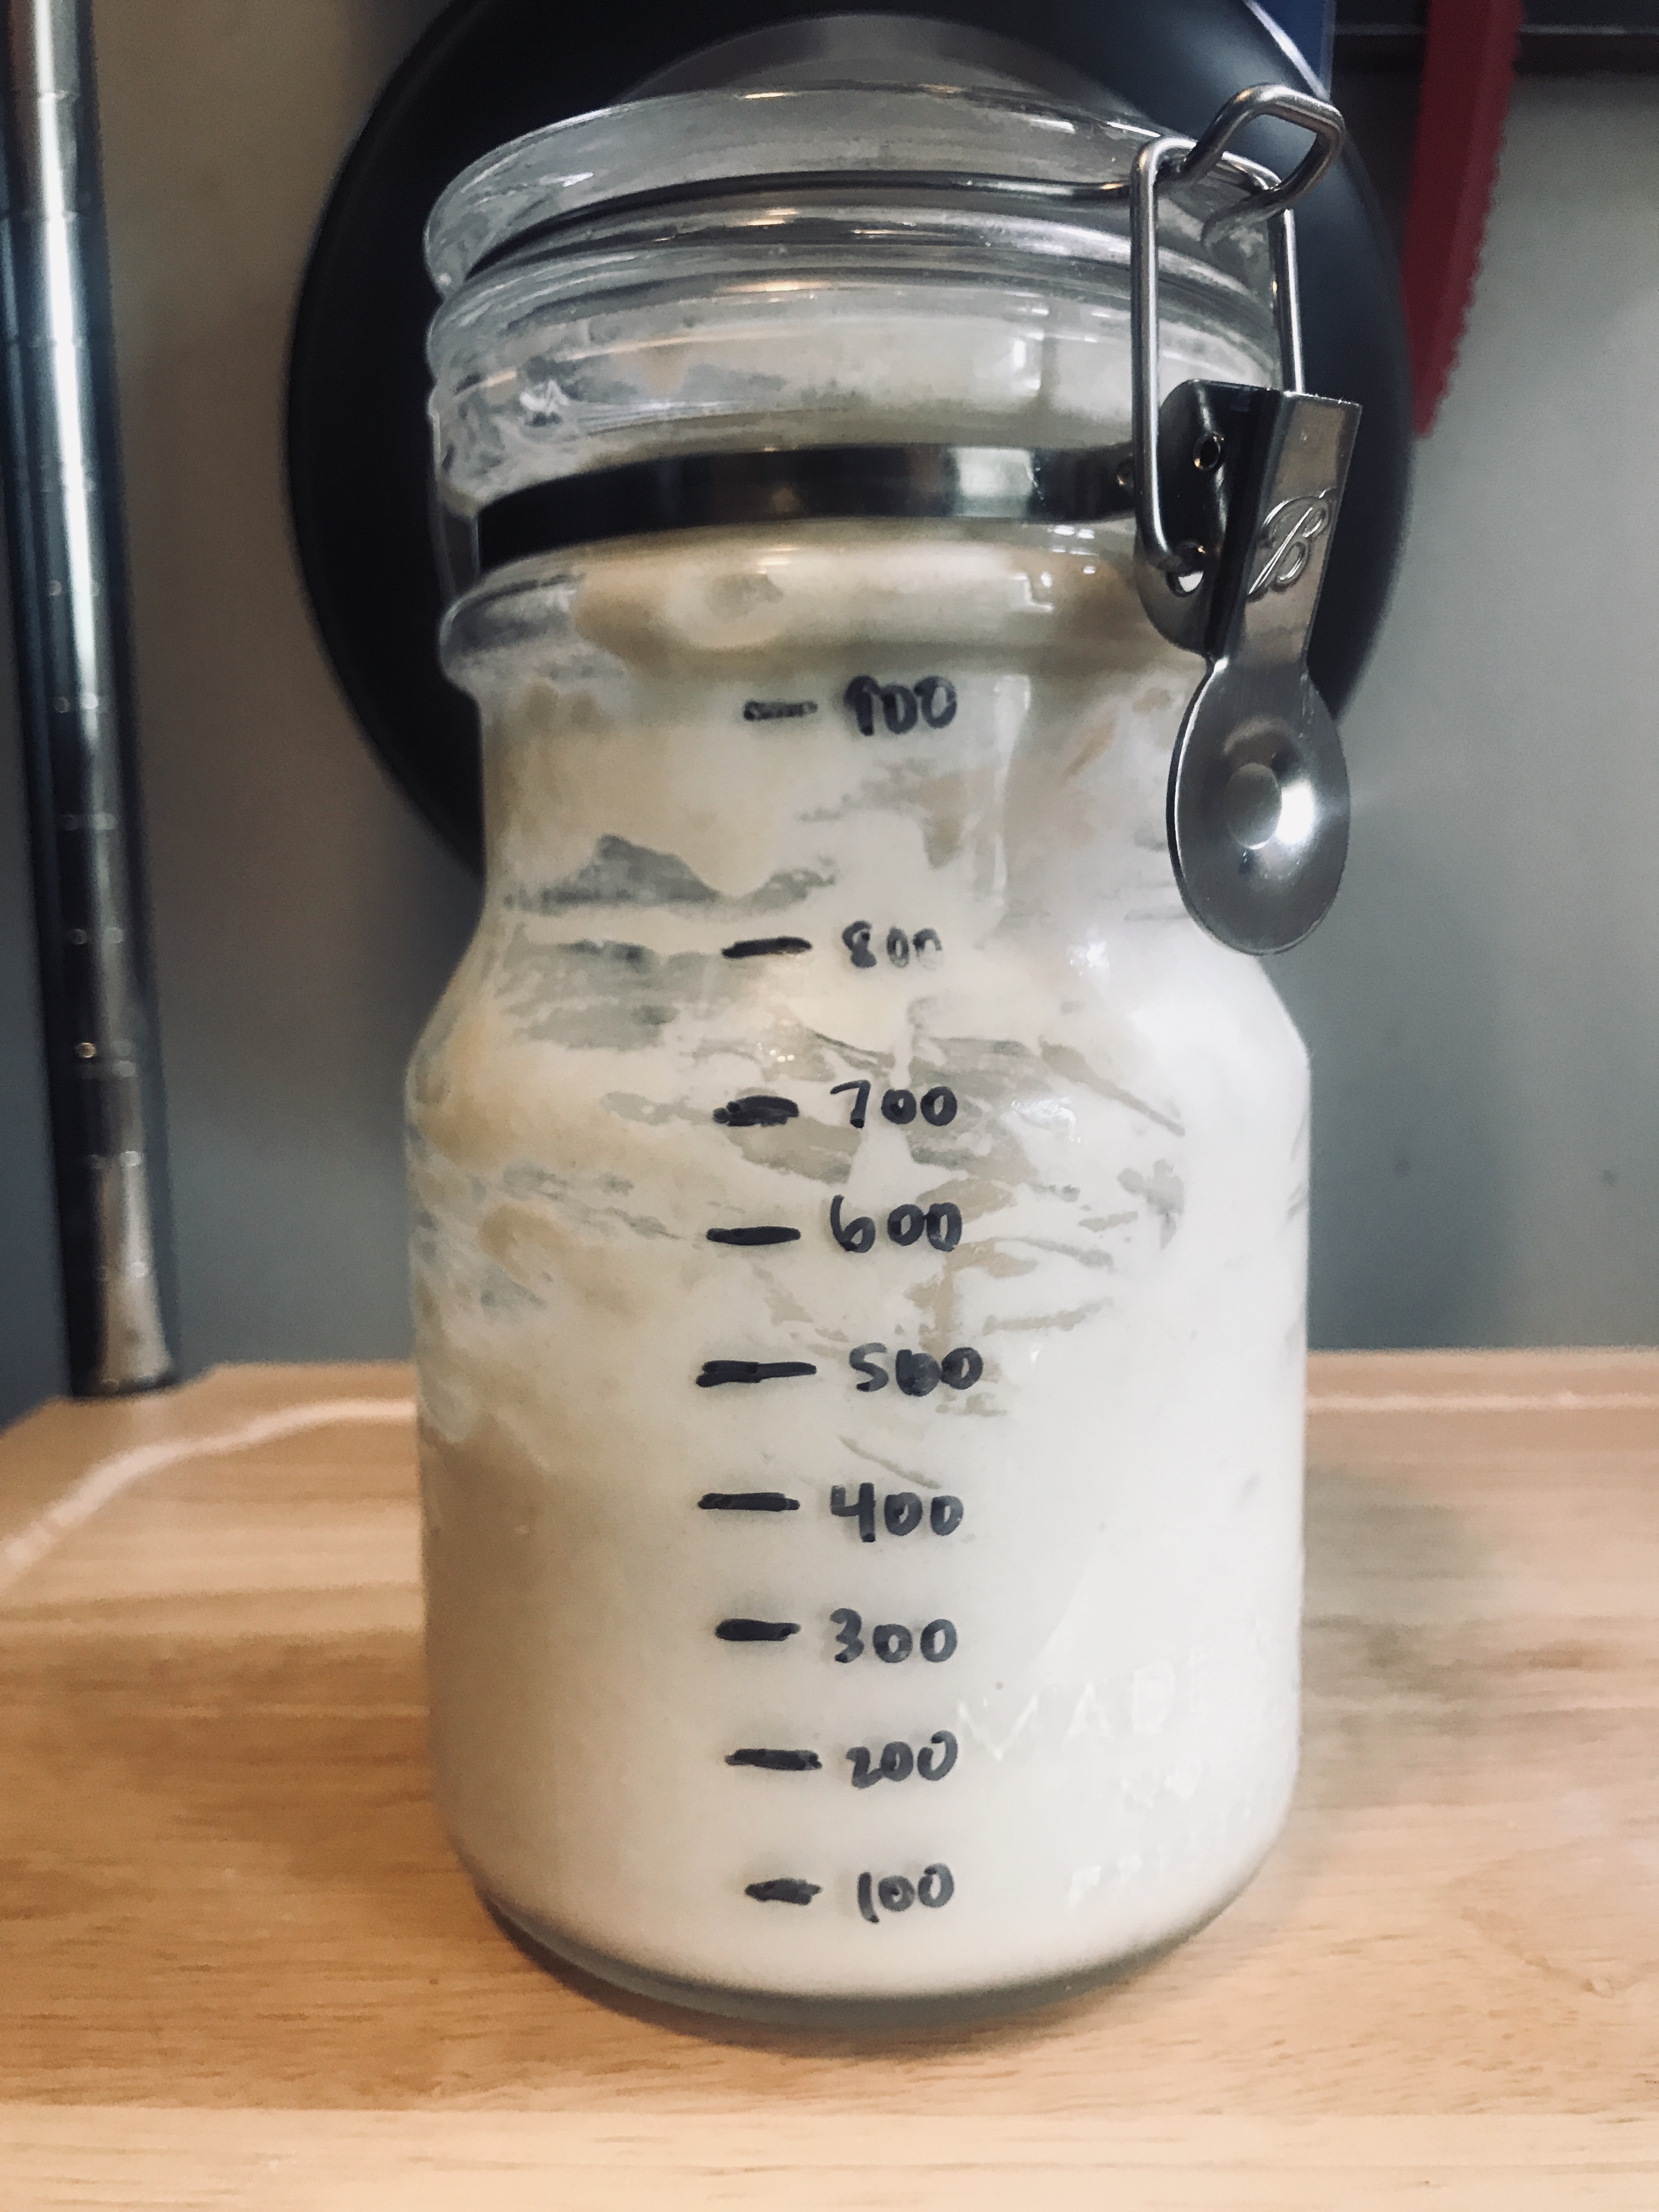 My sourdough starter that is over two years old and made the cross-country move with me.